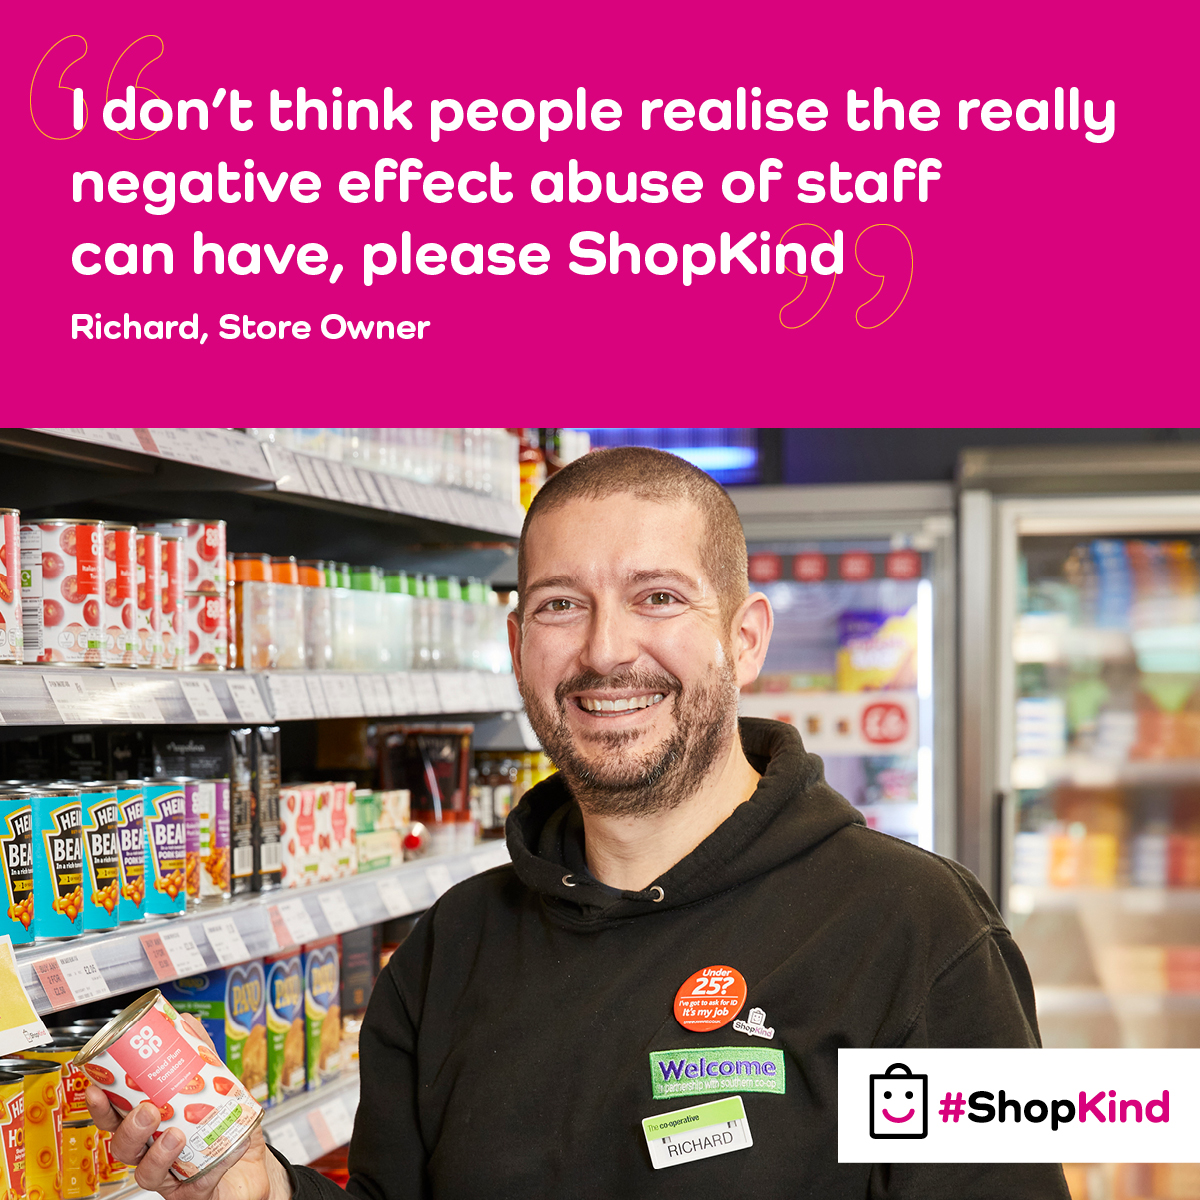 Everyone has the right to feel safe at work. In local convenience stores there were over 40,000 incidents of violence and 1.2 million acts of verbal abuse reported in the last year. The #ShopKind campaign addresses the growing problem of violence and abuse against shopworkers.